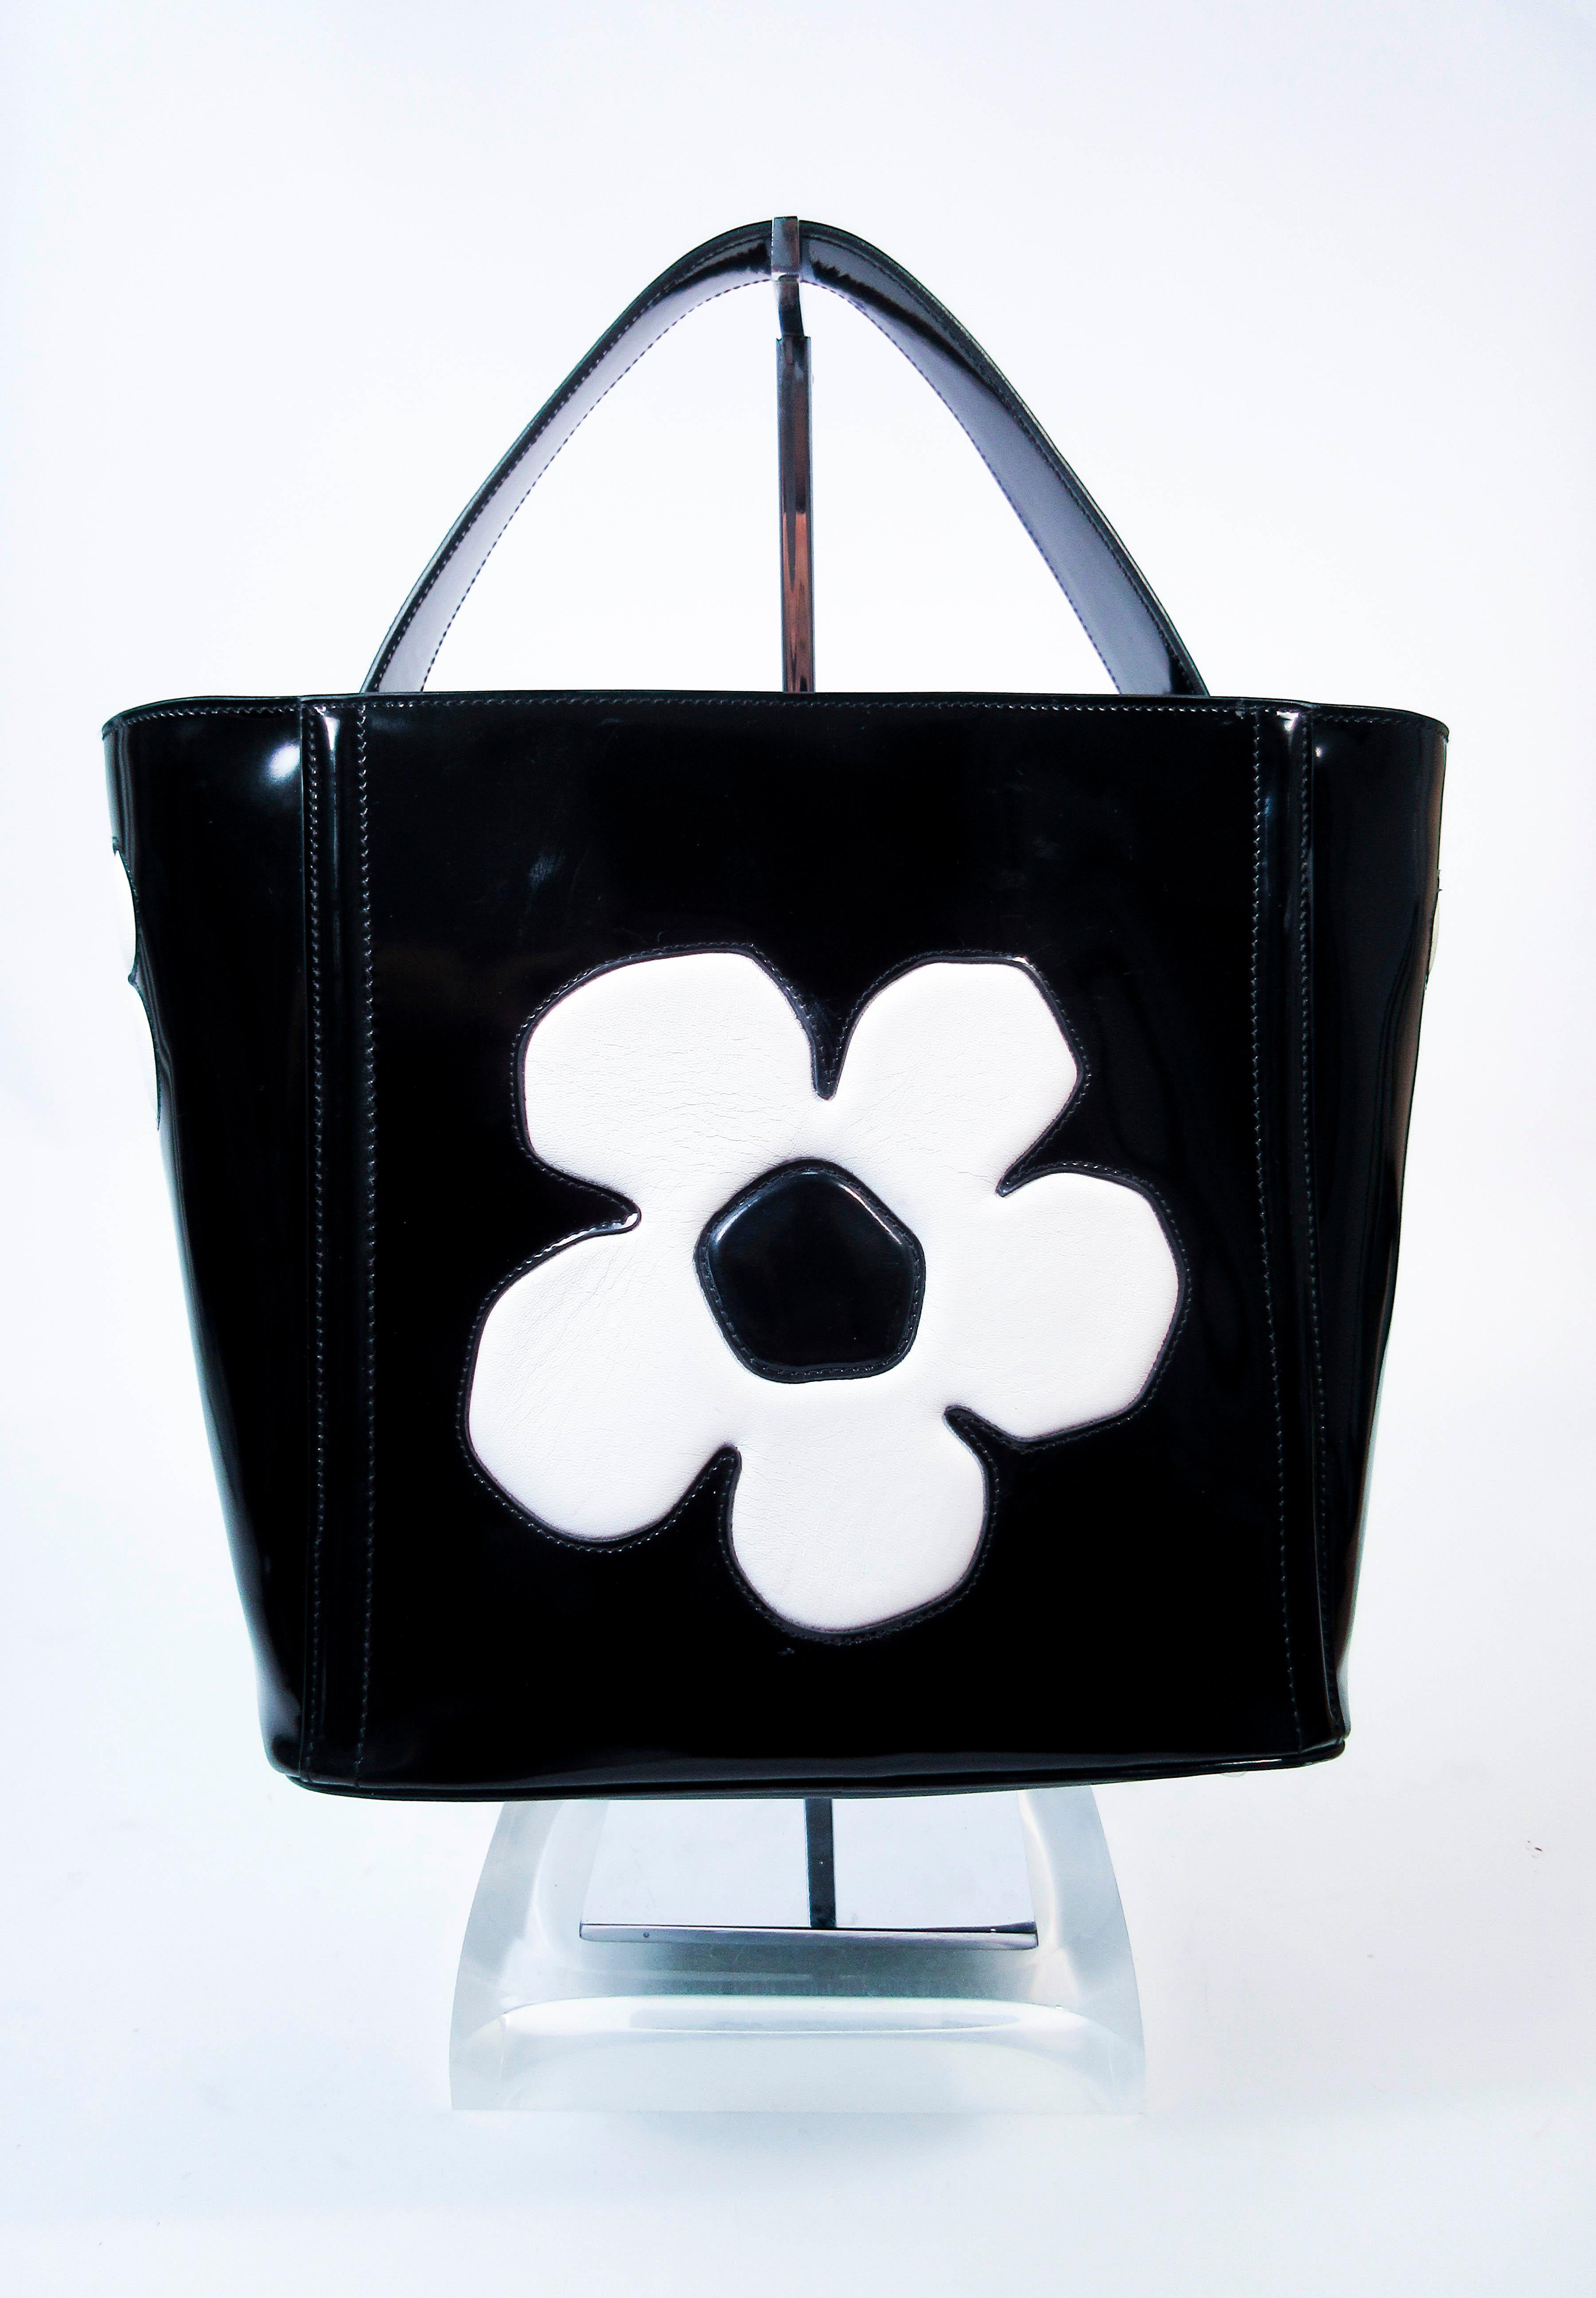 Prada Black and White Patent Leather Flower Purse with Optional Shoulder Strap  2